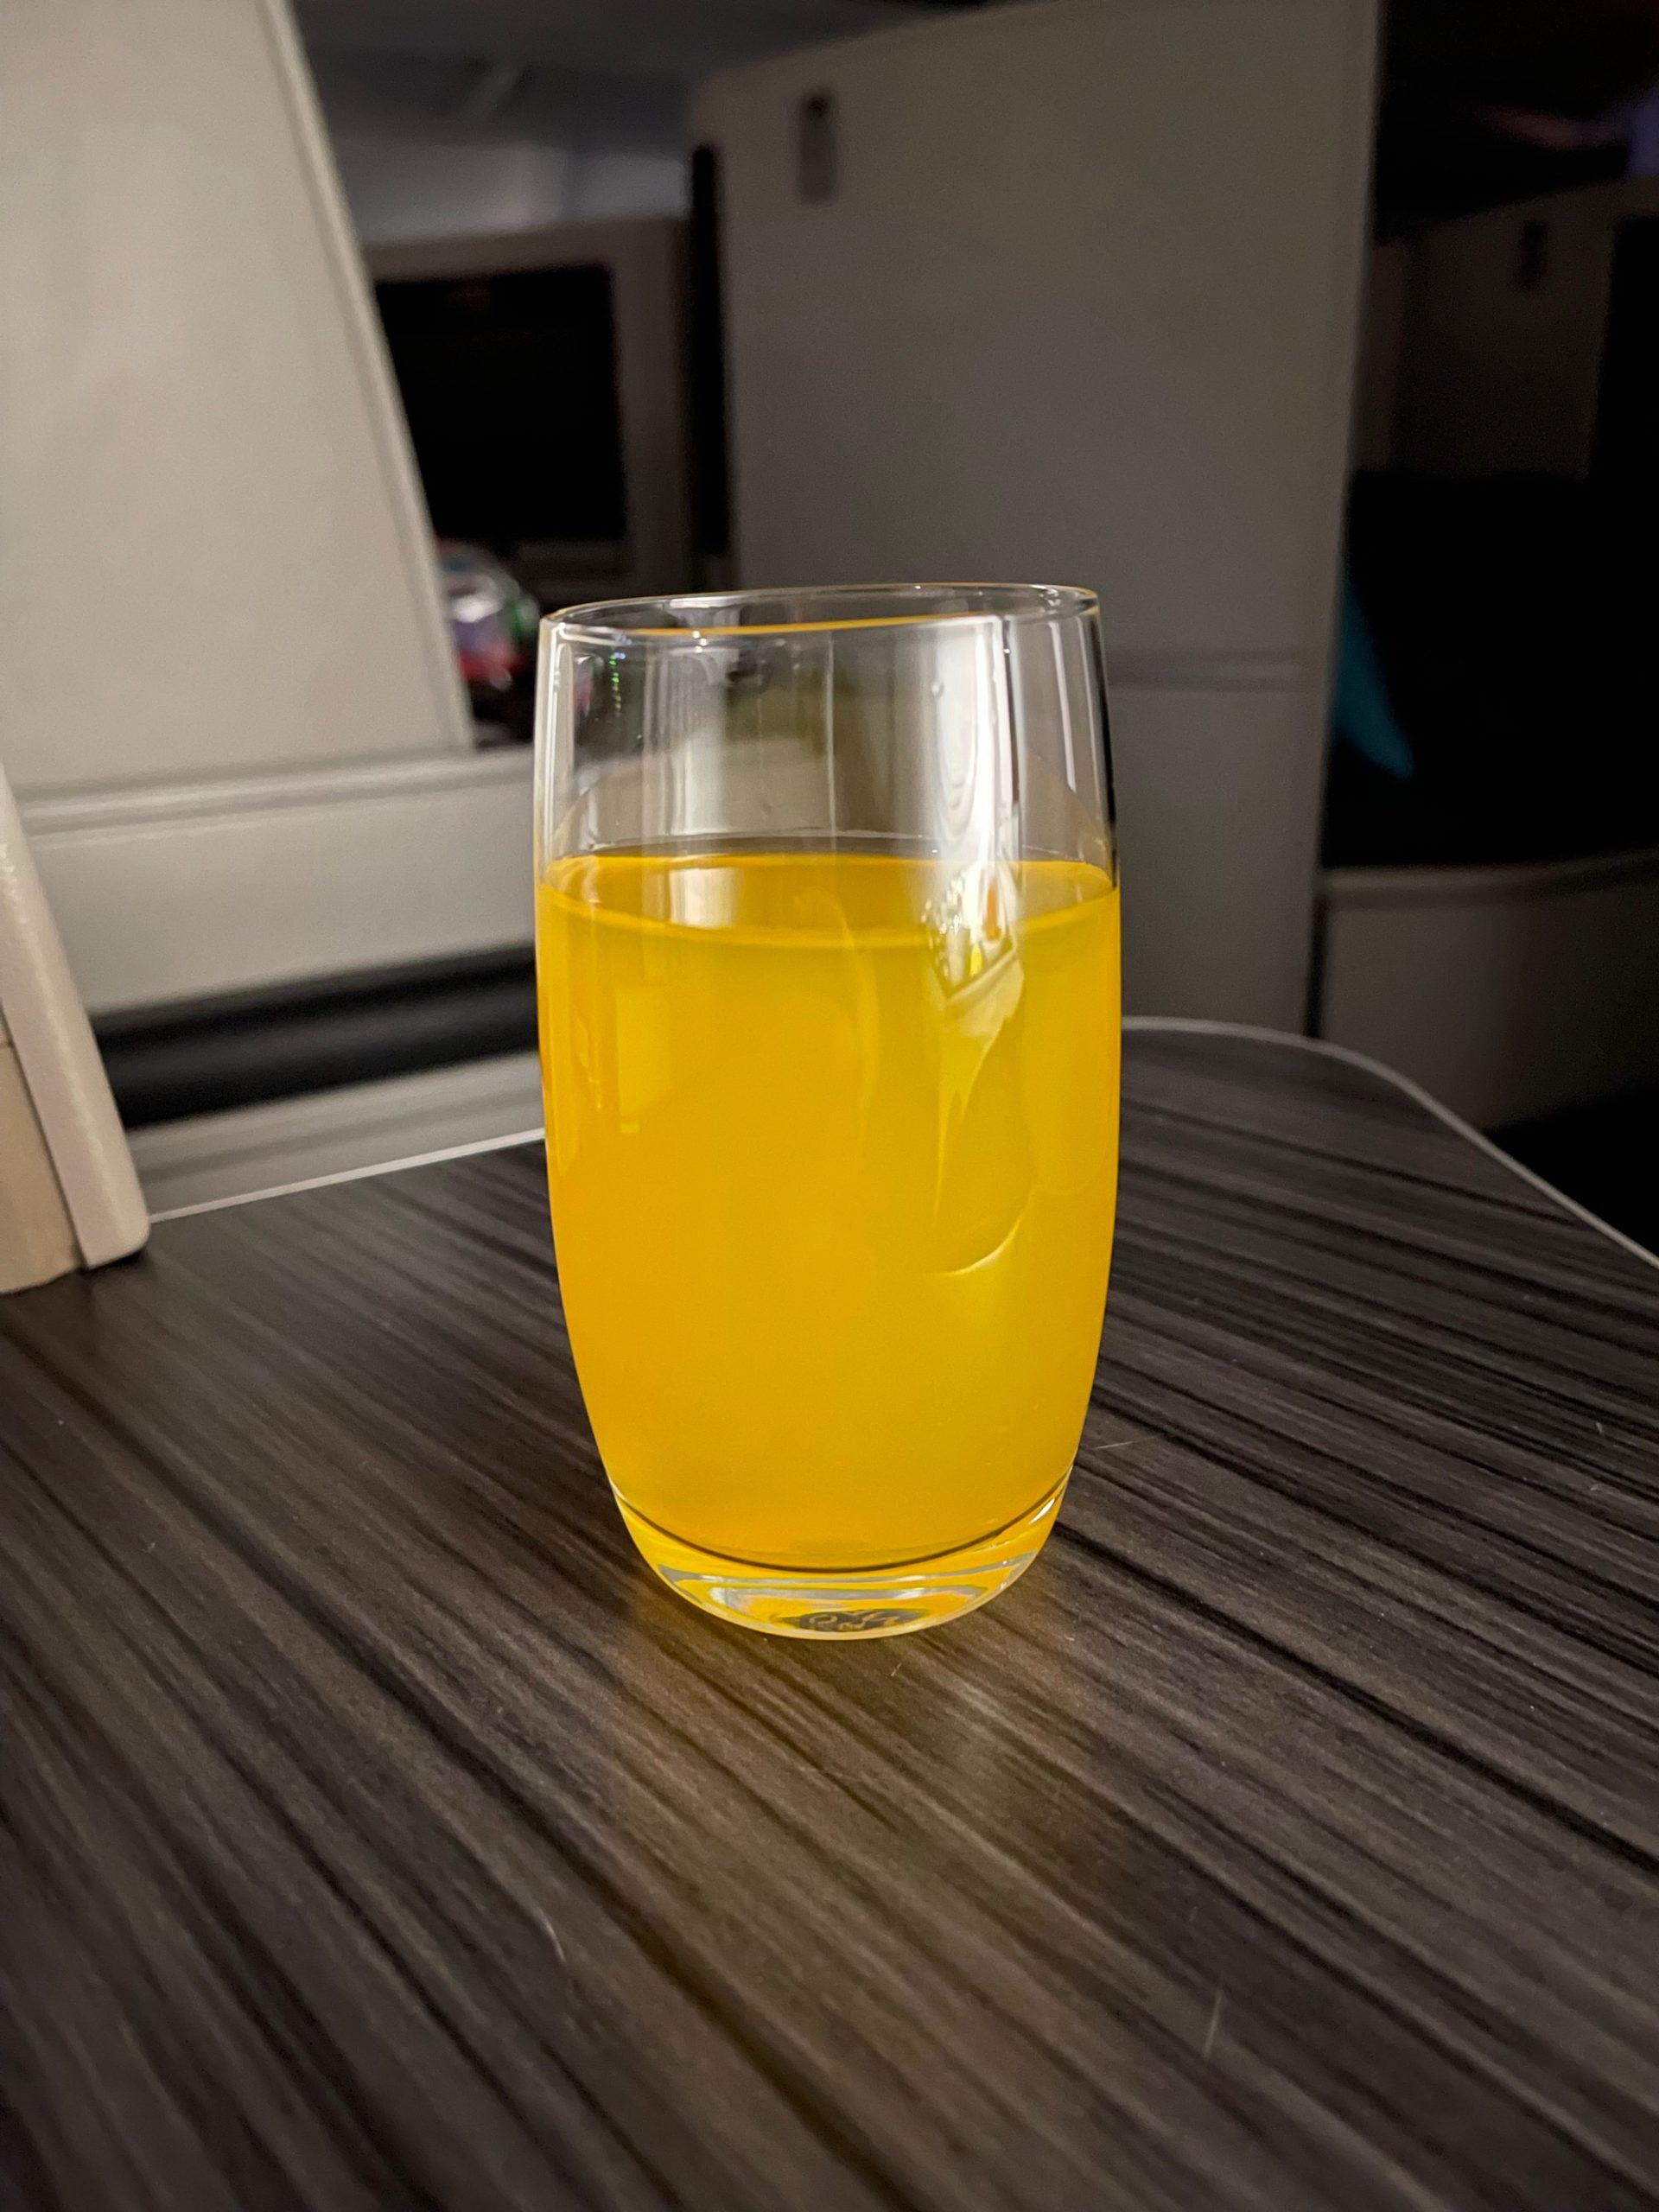 a glass of orange liquid on a table